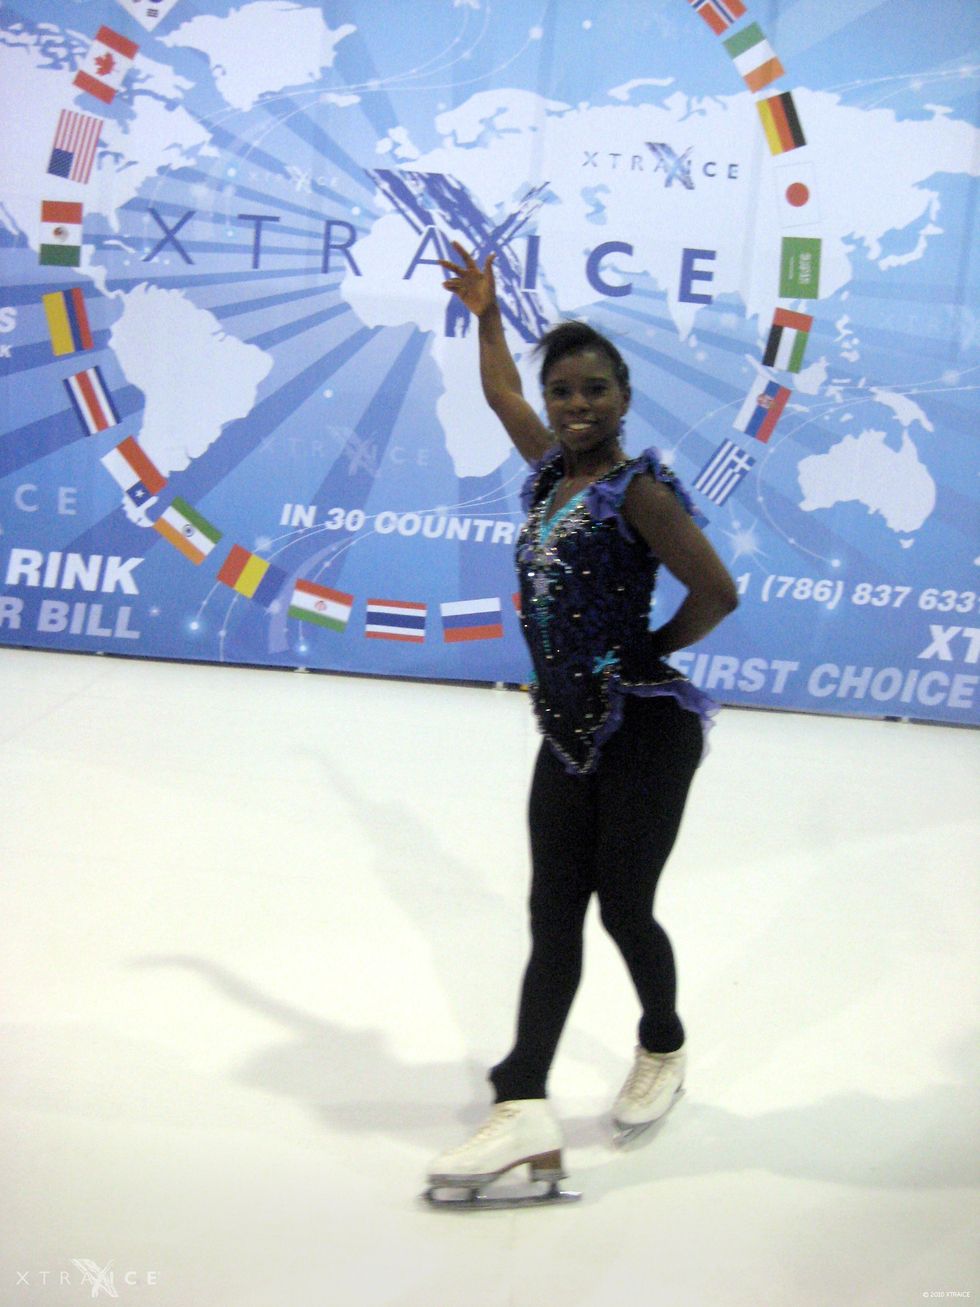 Surya Bonaly Aims To Expand Racial Diversity In Winter Olympic Sports